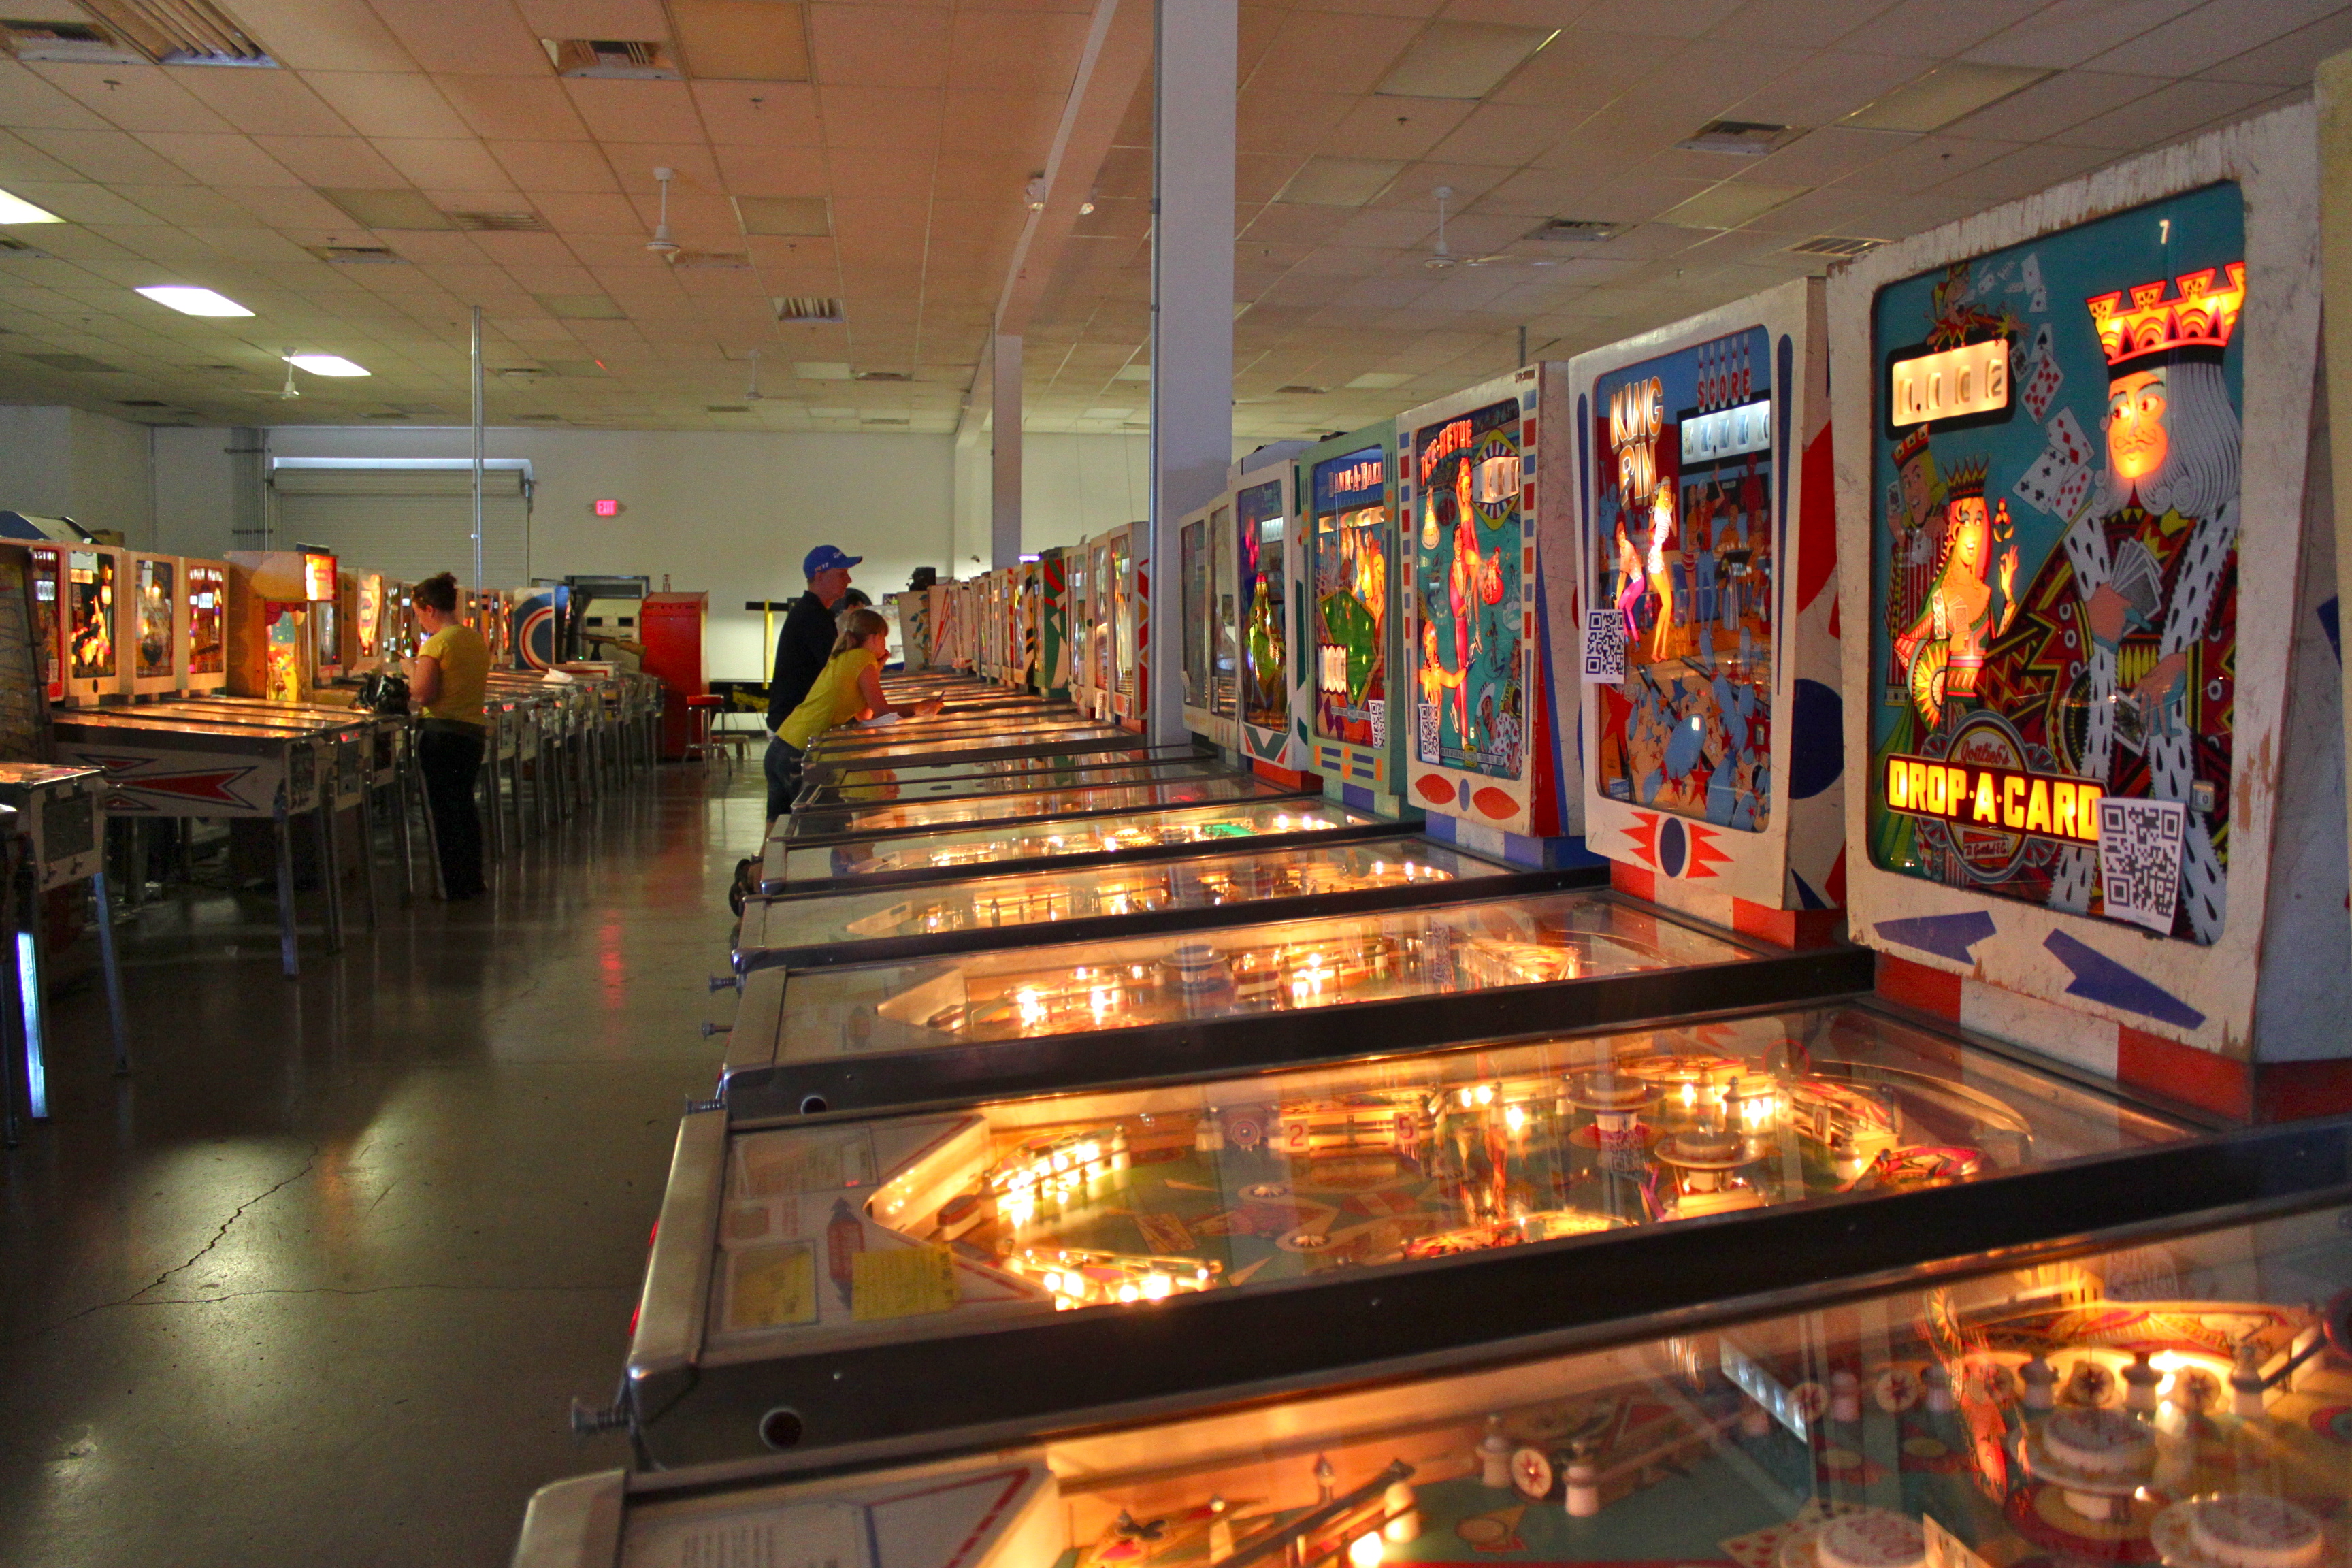 Pinball Hall Of Fame is one of the very best things to do in Las Vegas